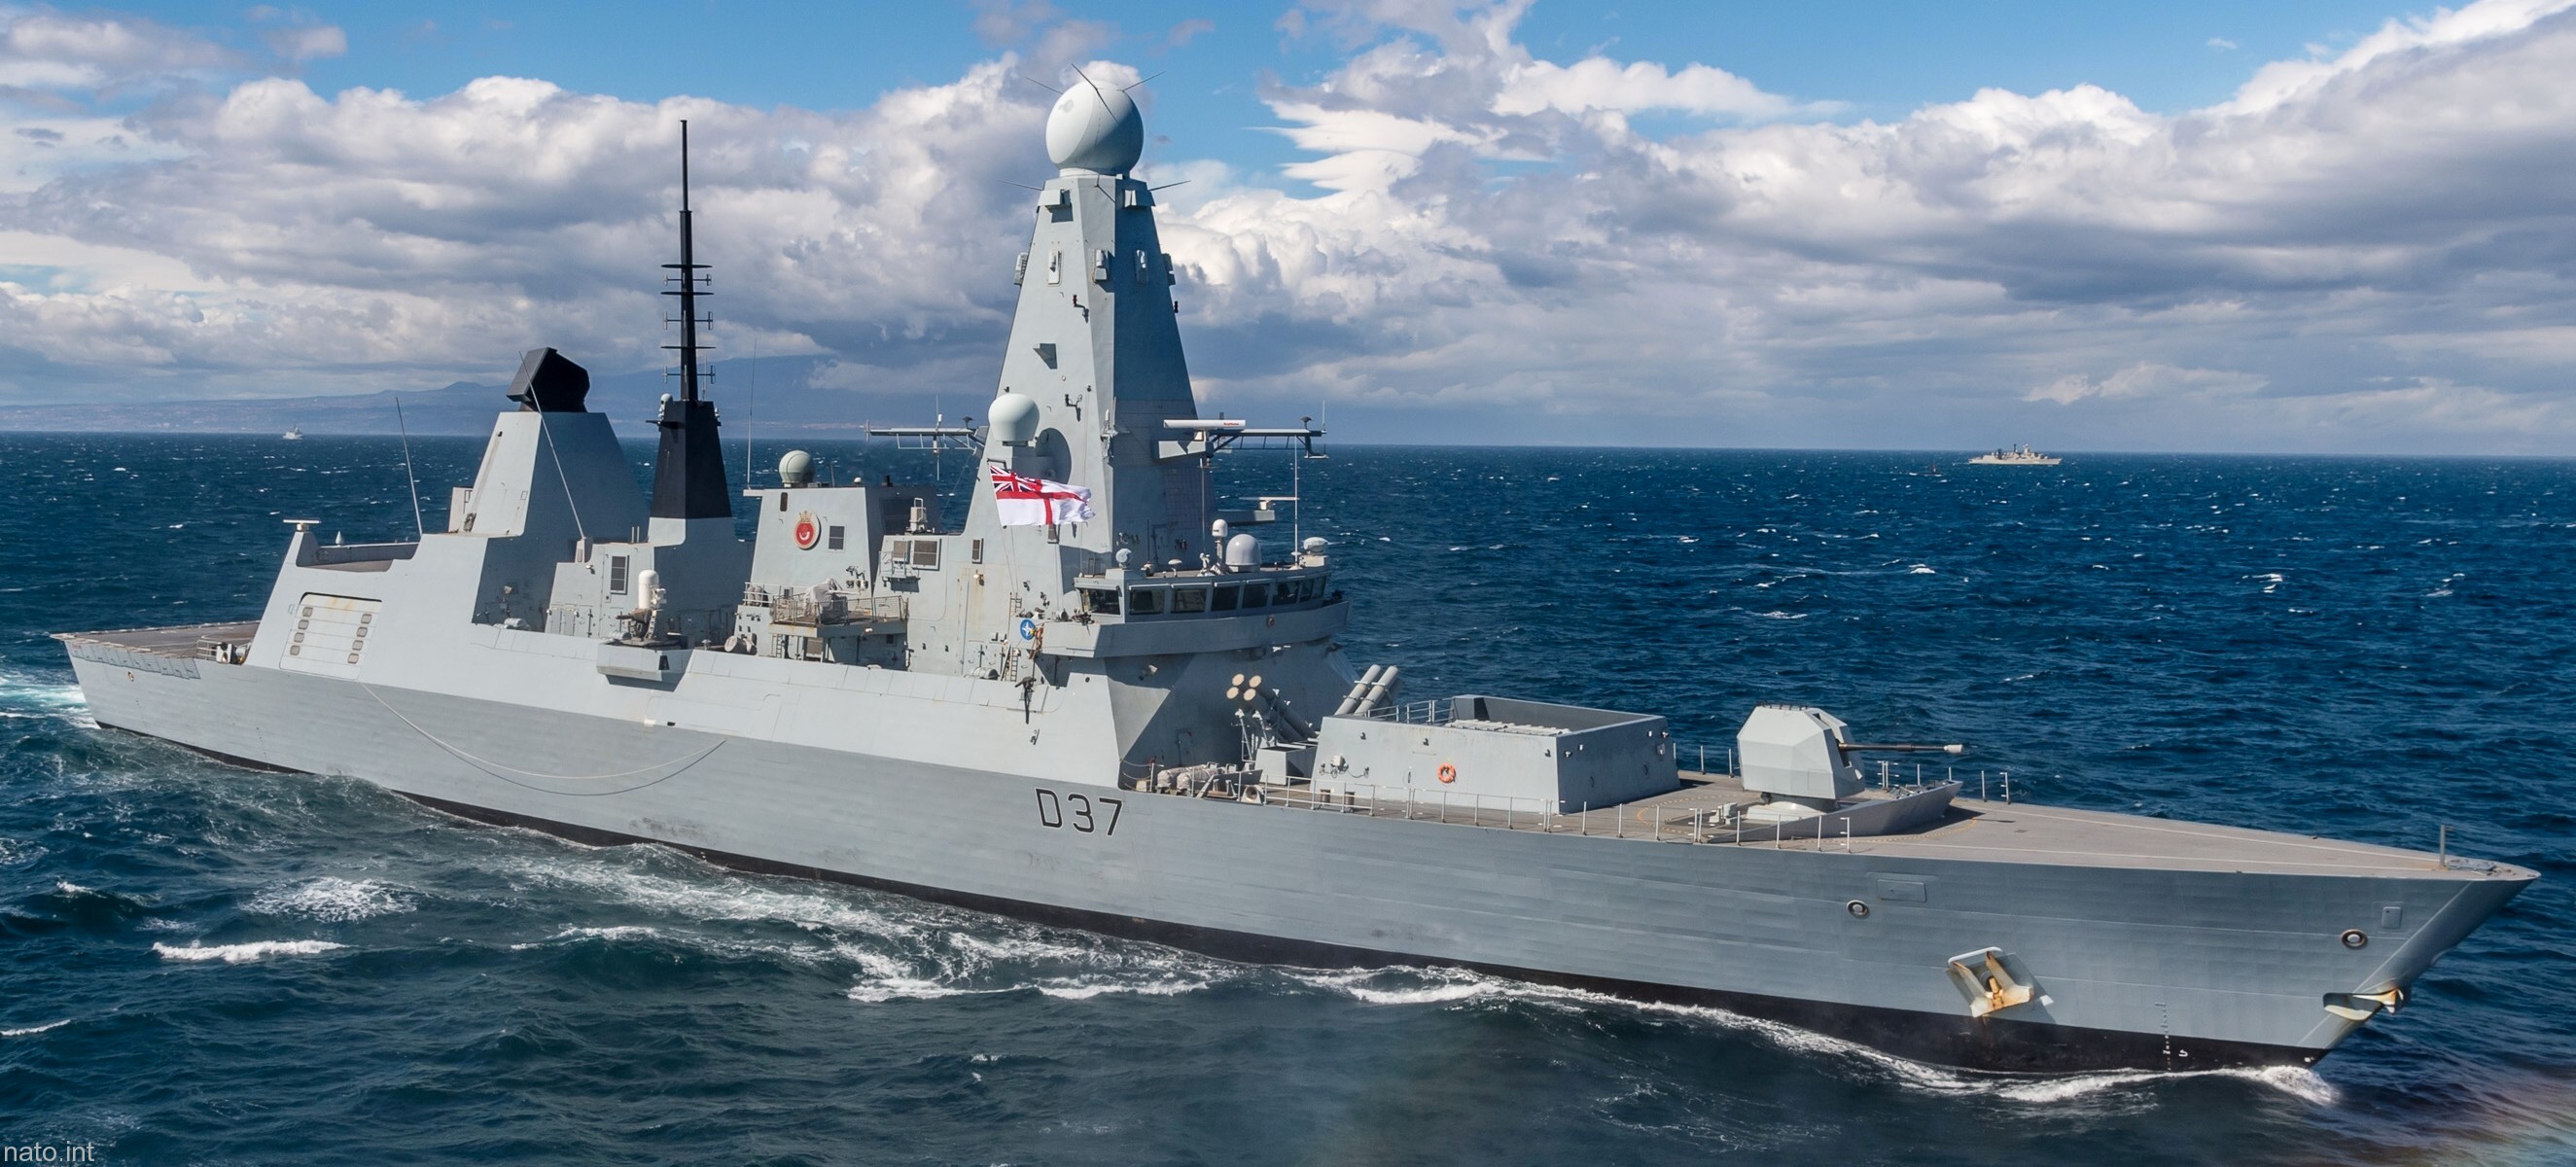 hms duncan d-37 type 45 daring class guided missile destroyer ddg royal navy sea viper paams 35